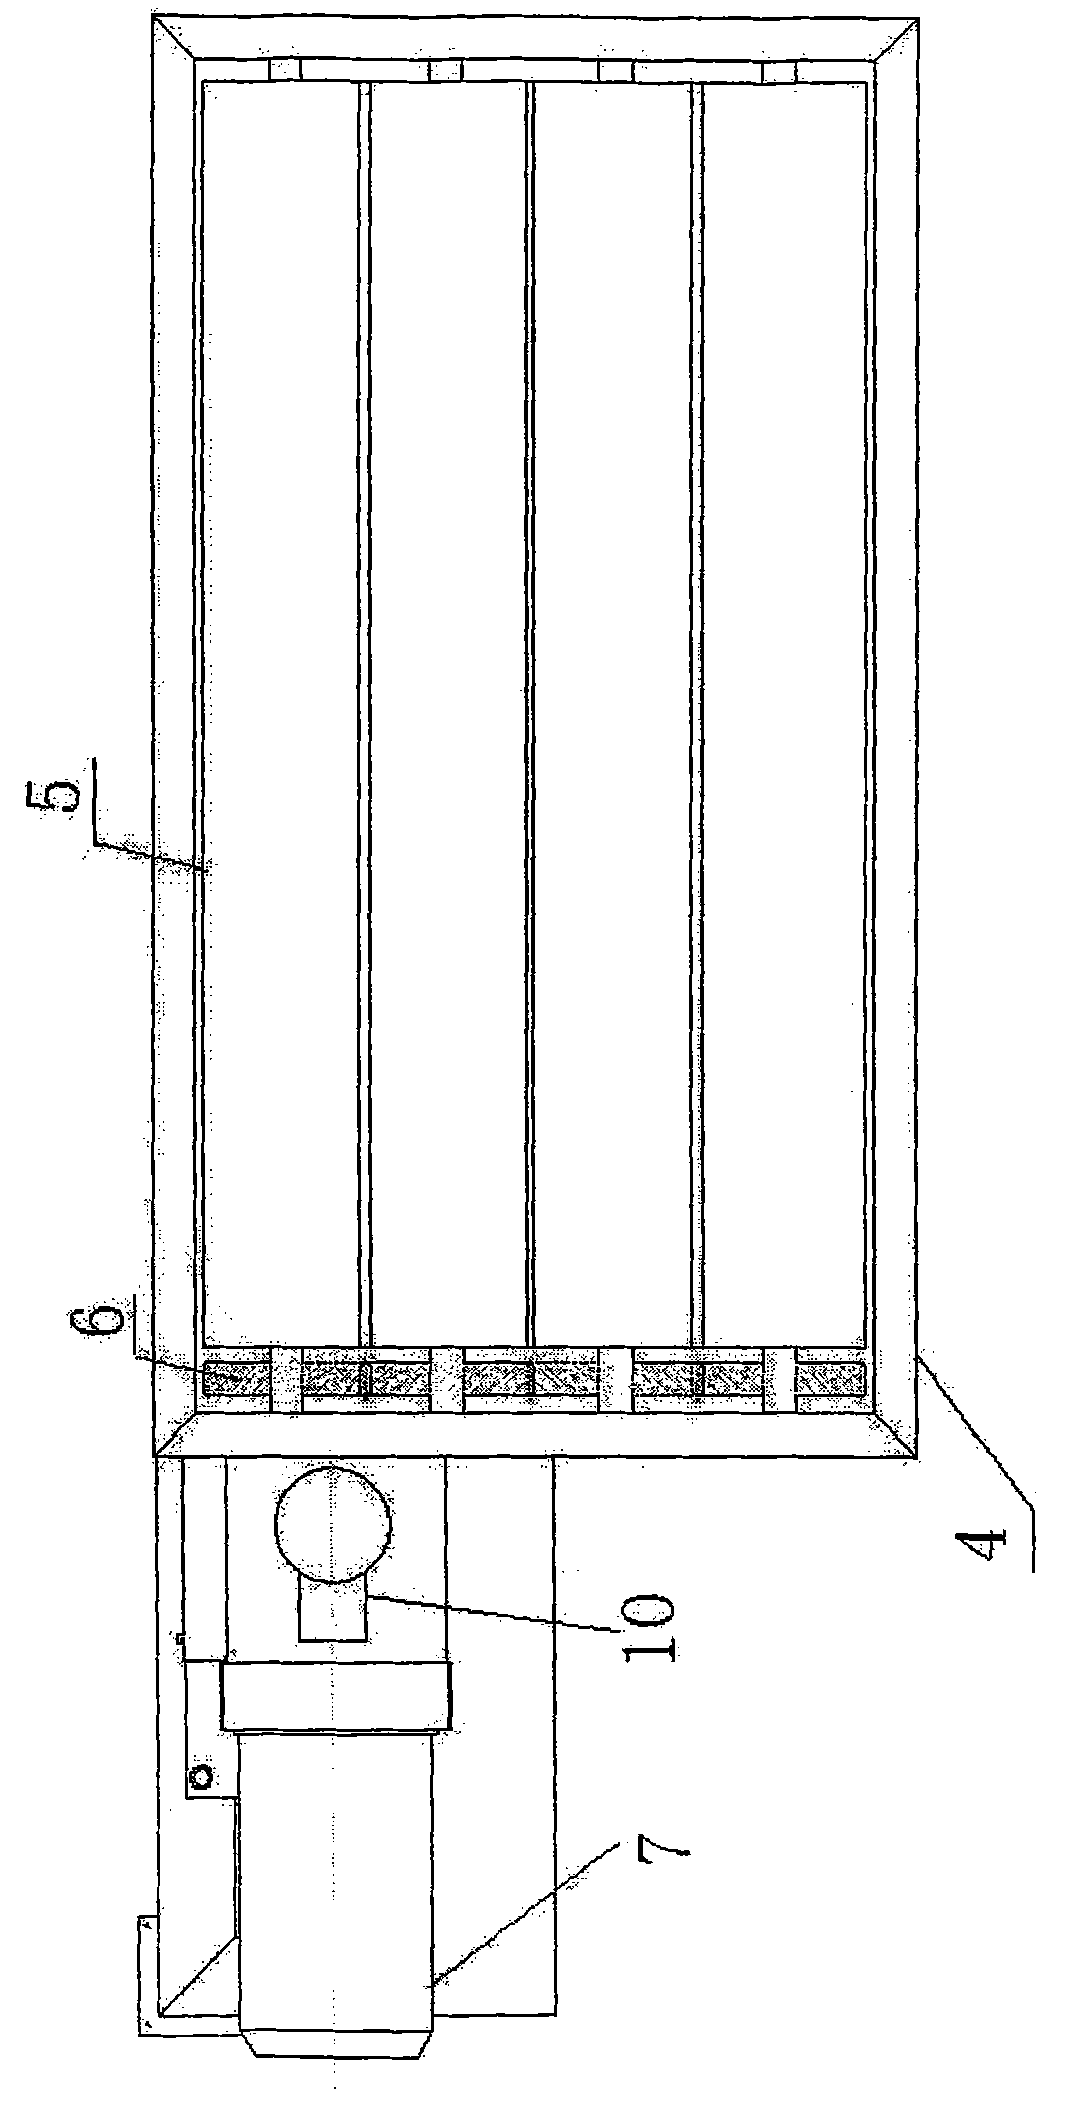 Method and equipment for disassembling waste ceramic resistors and recovering resources